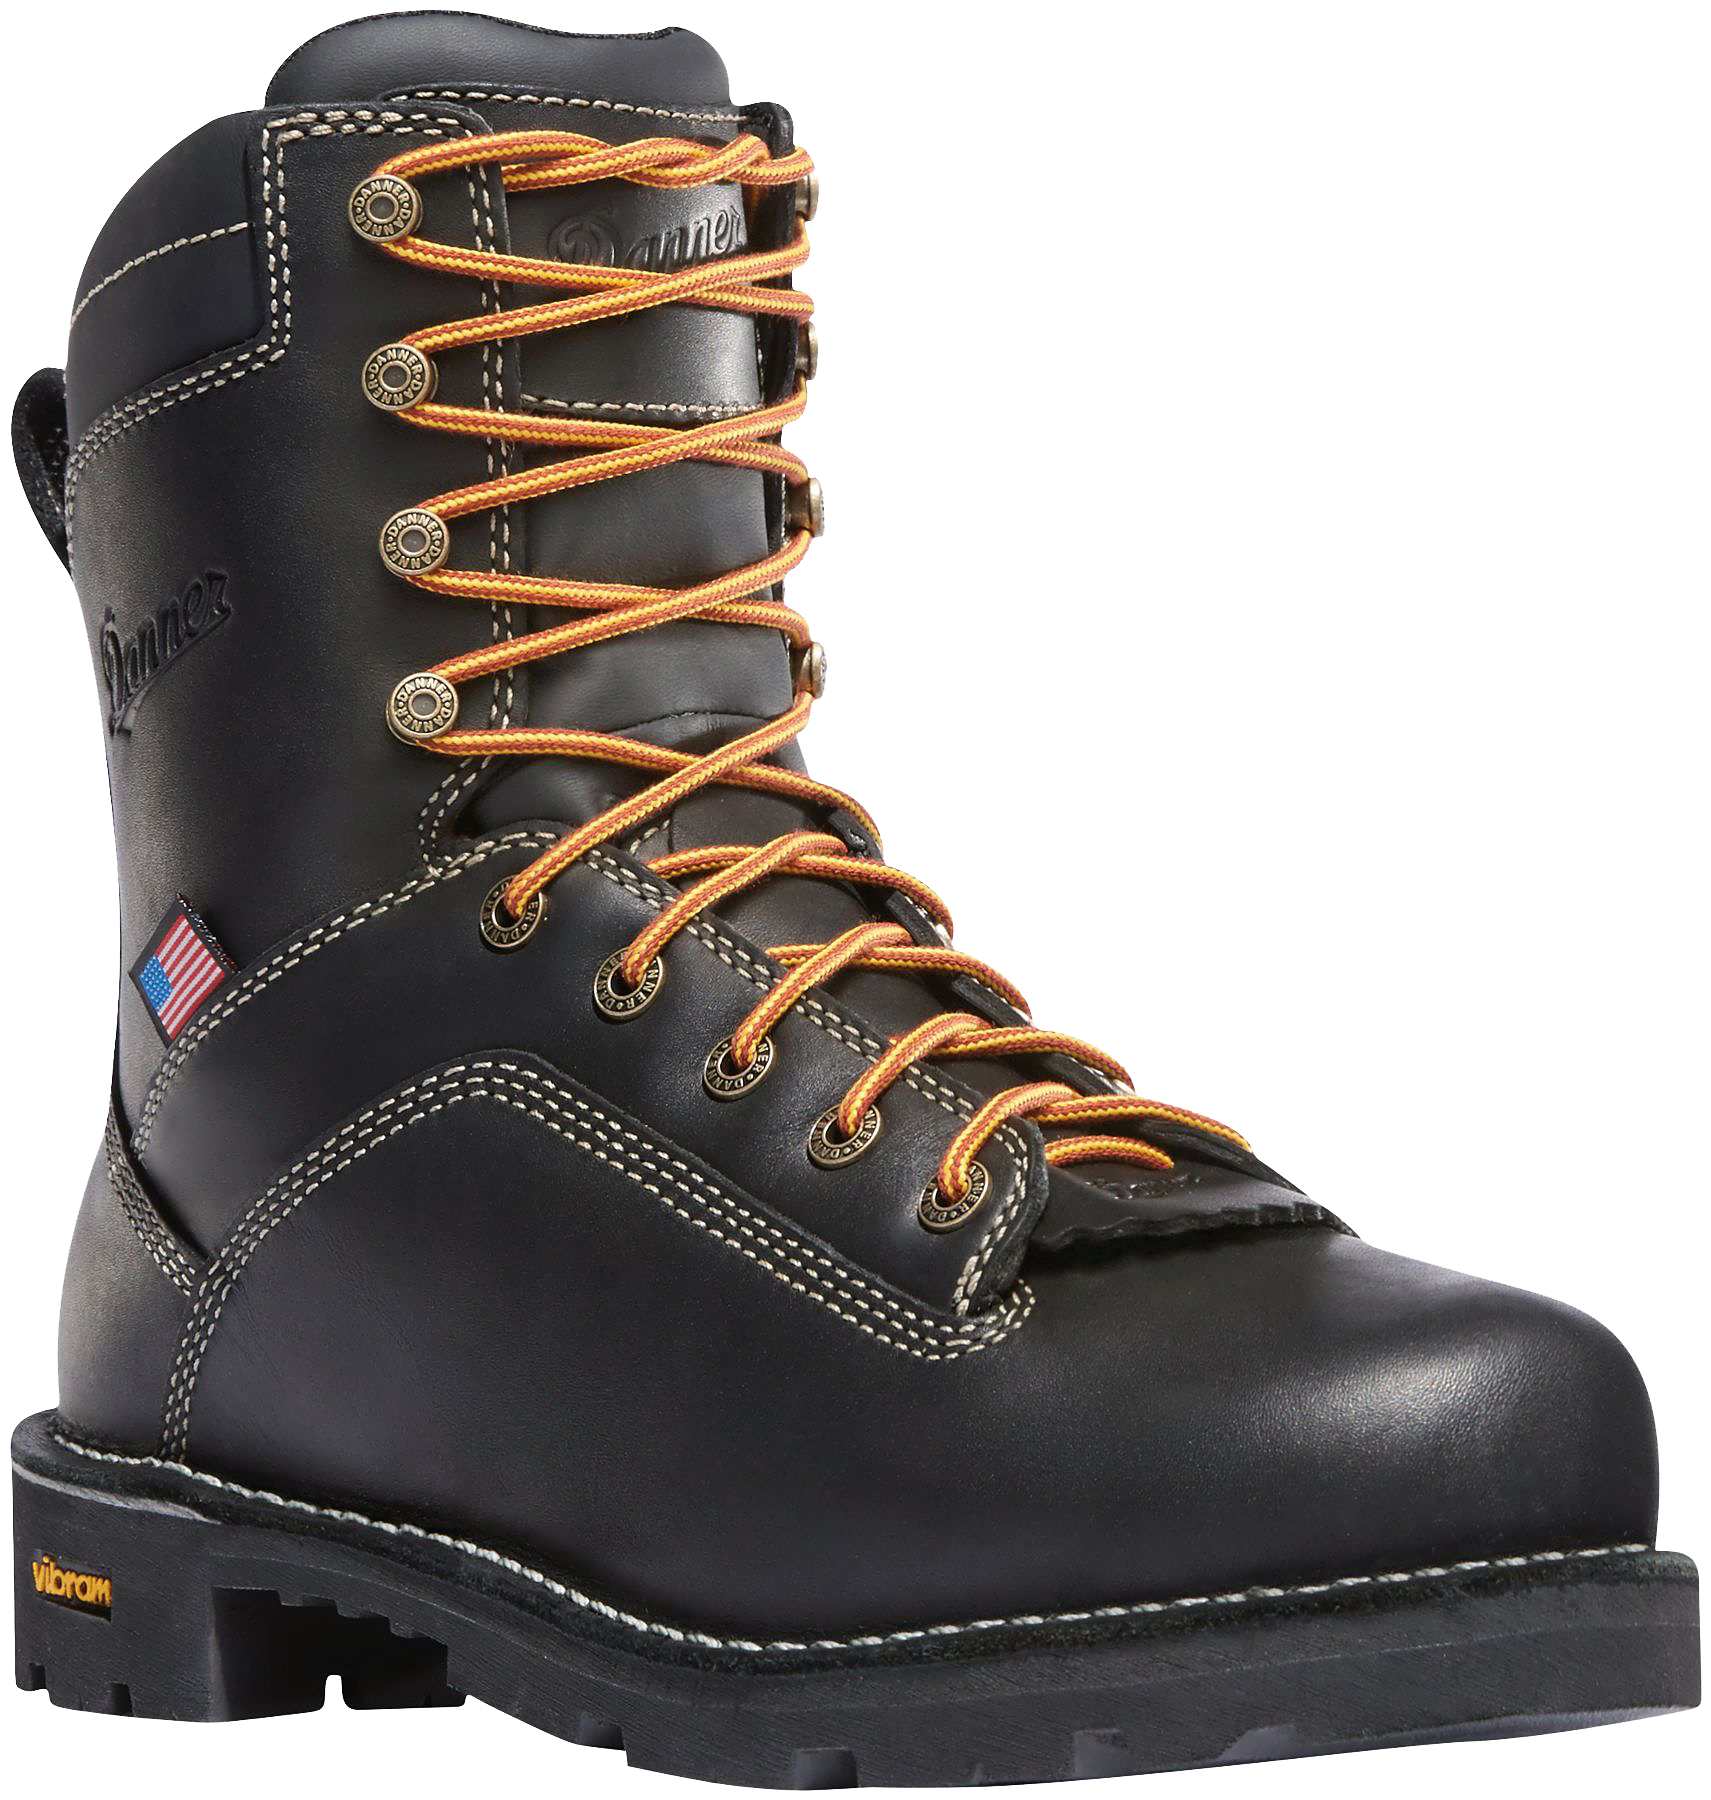 Danner Quarry USA Brown GORE-TEX Alloy Toe Work Boots for Men - Black - 12M